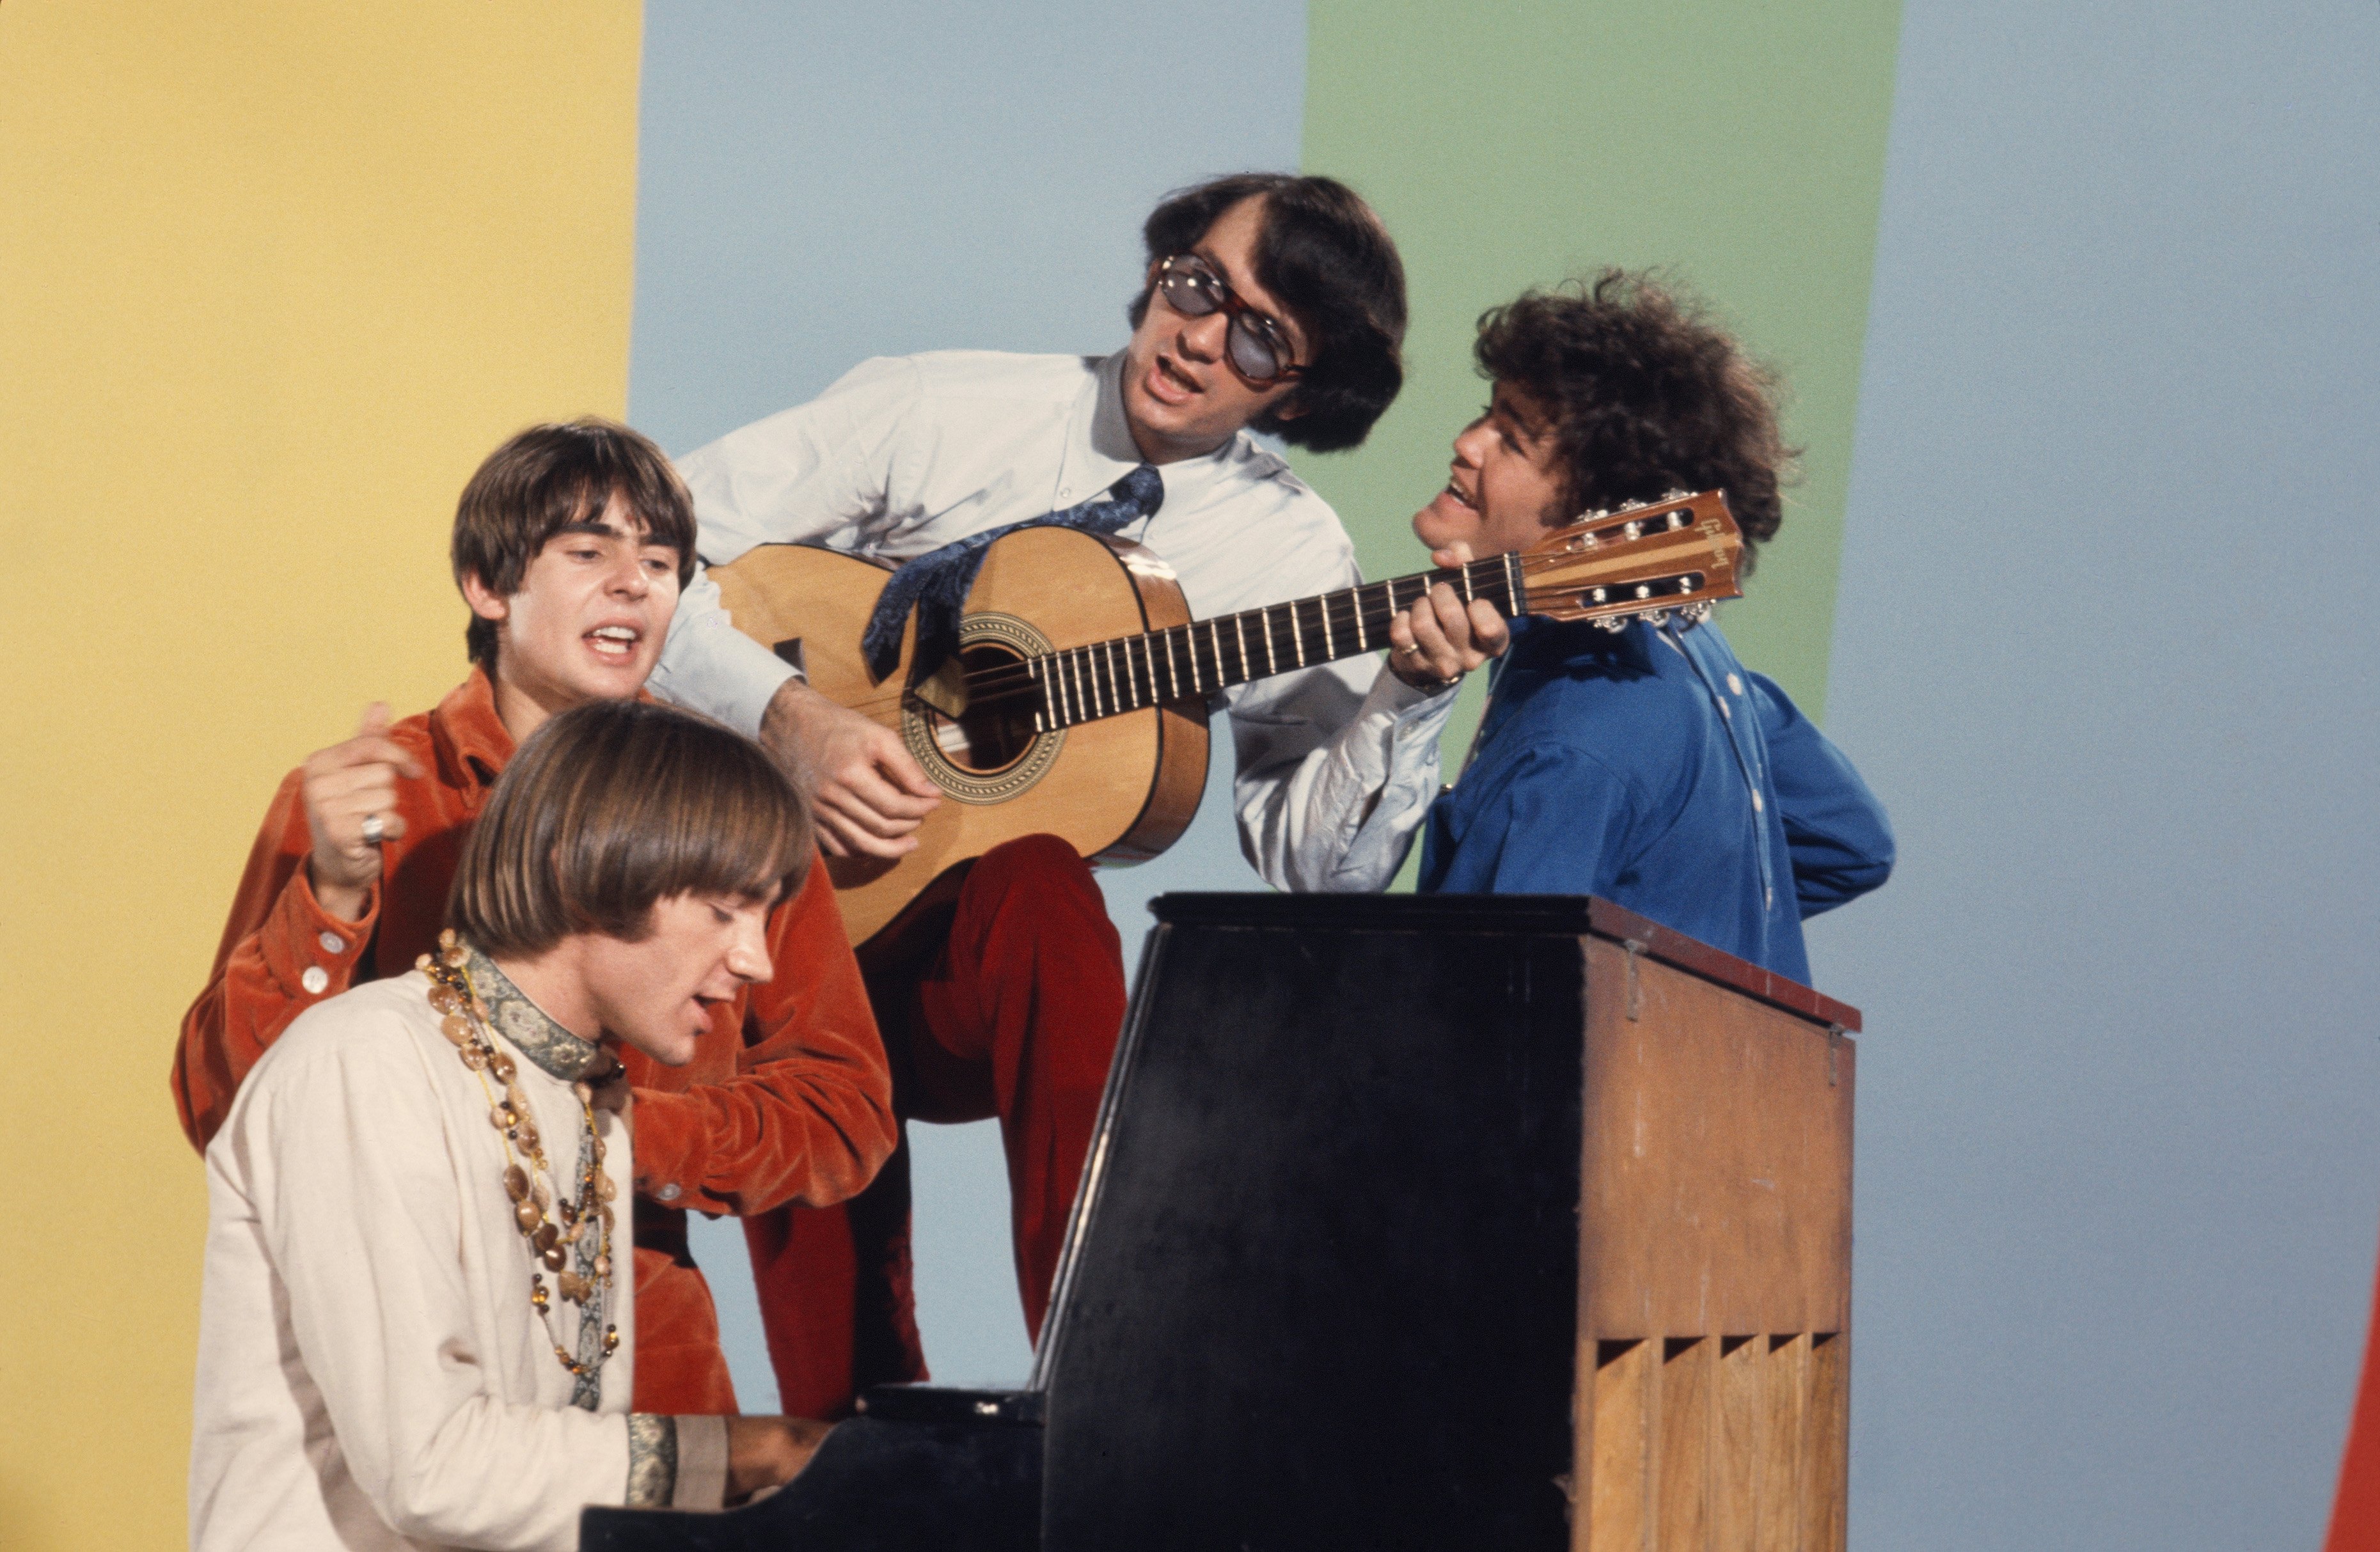 The Monkees' Davy Jones, Peter Tork, Mike Nesmith, and Mickey Dolenz near a piano